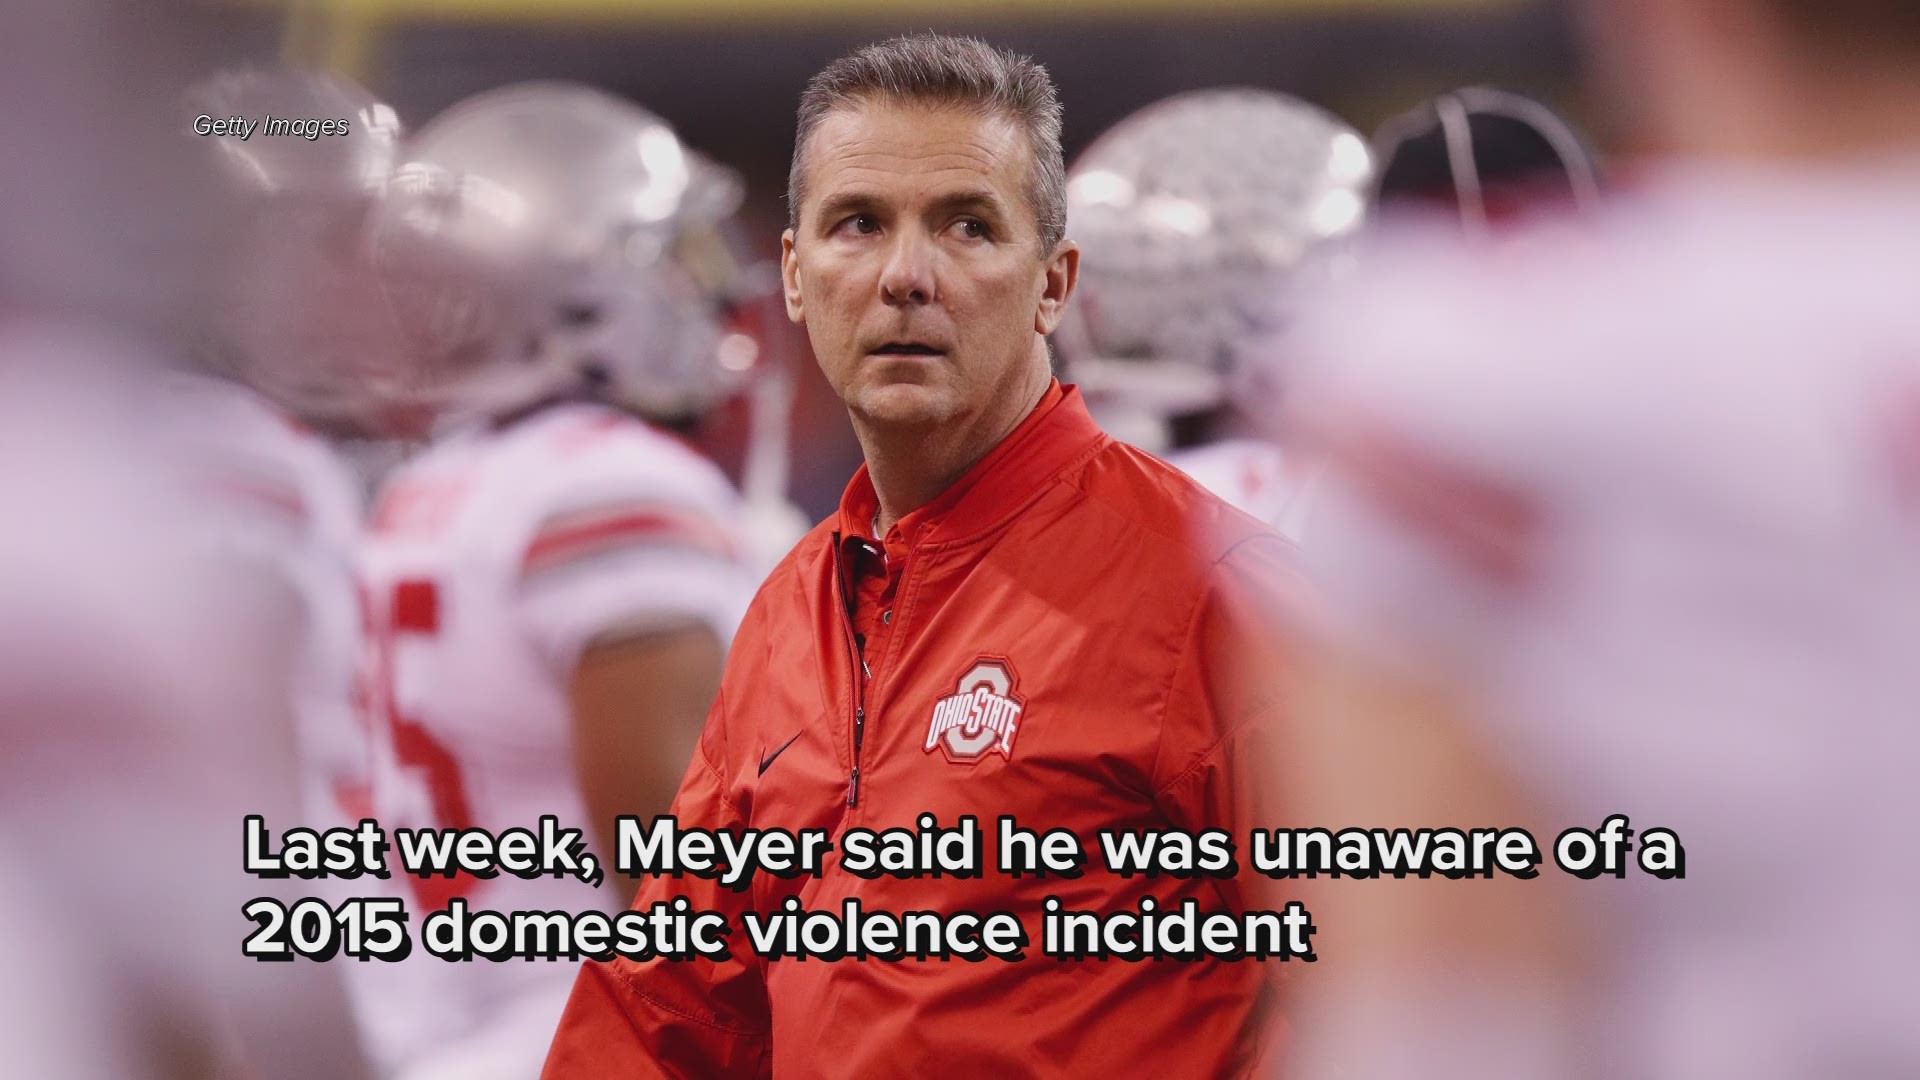 Report: Ohio State coach Urban Meyer knew about Zach Smith's domestic abuse allegations in 2015